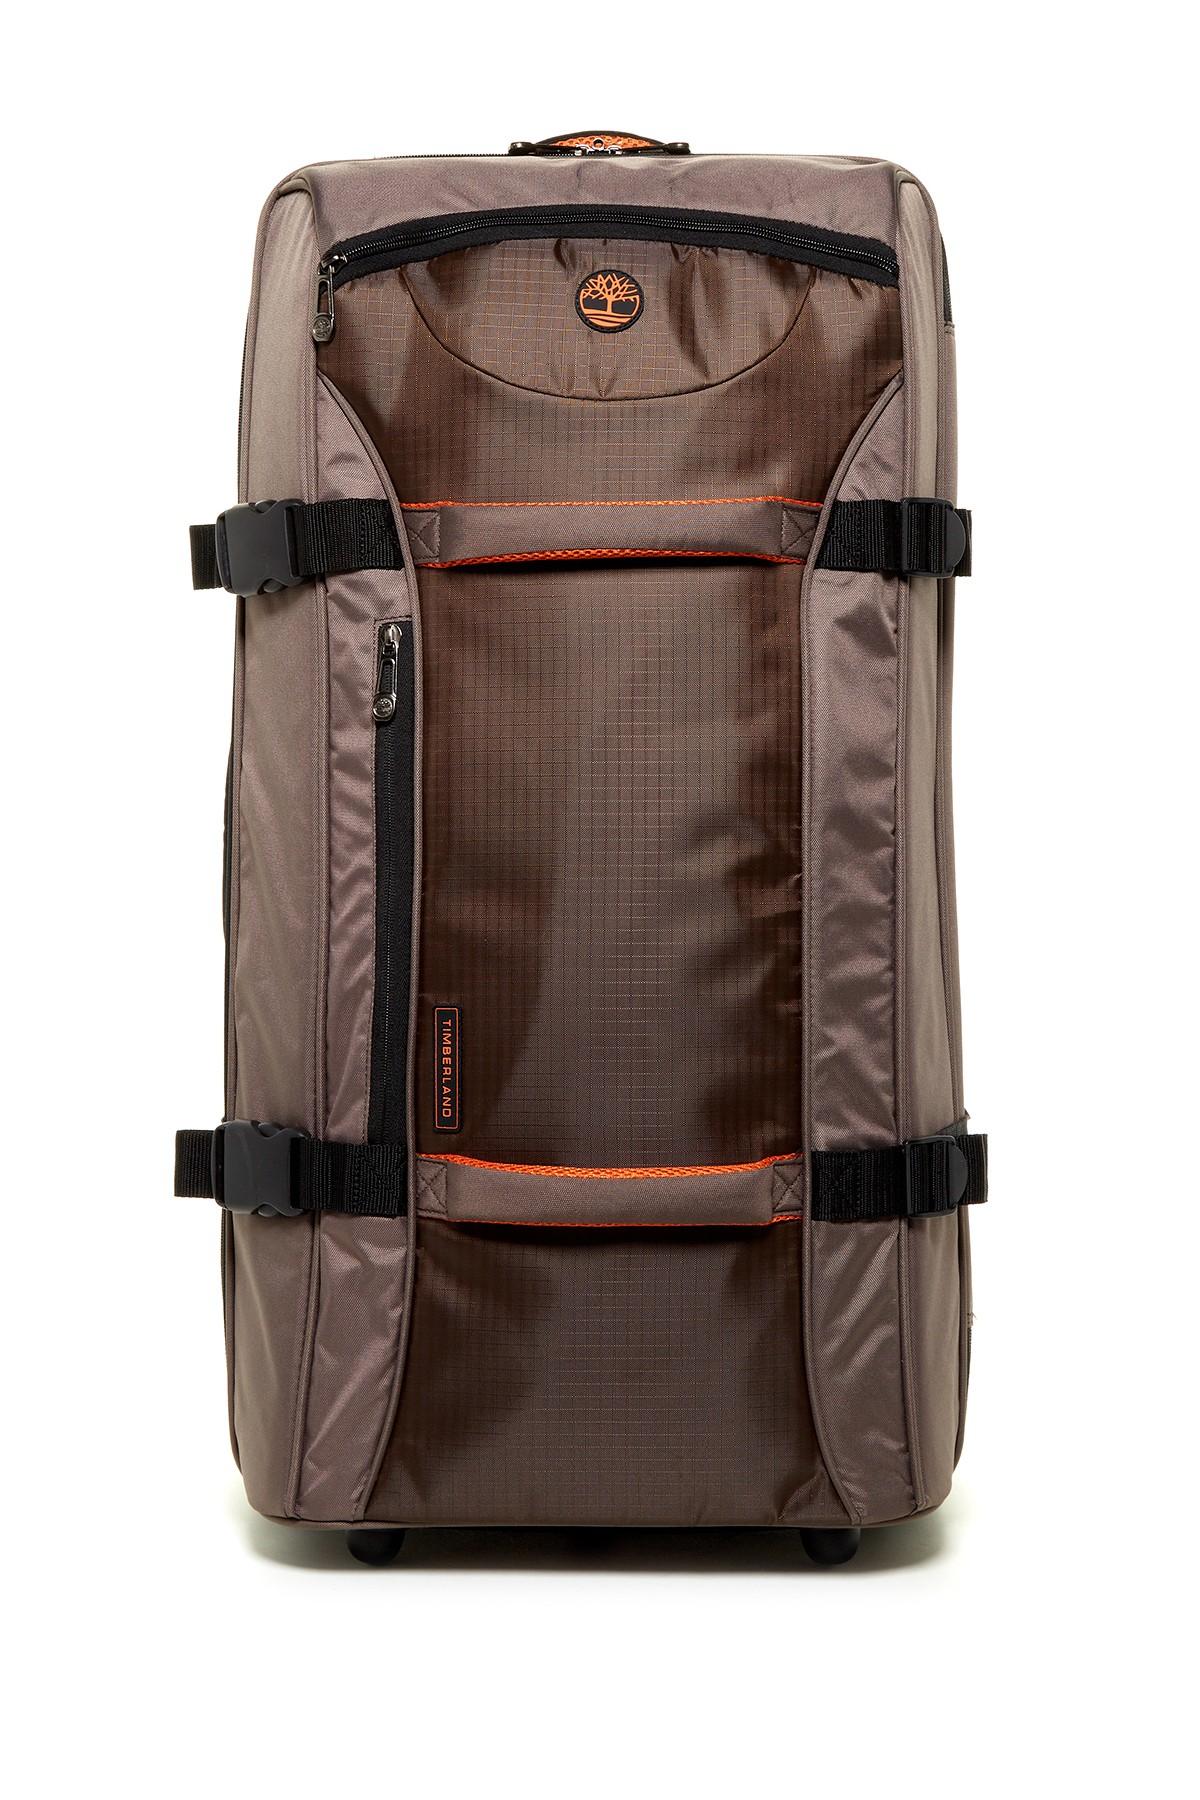 Timberland Synthetic Twin Mountain 30" Wheeled Duffle in Cocoa (Black) for  Men - Lyst